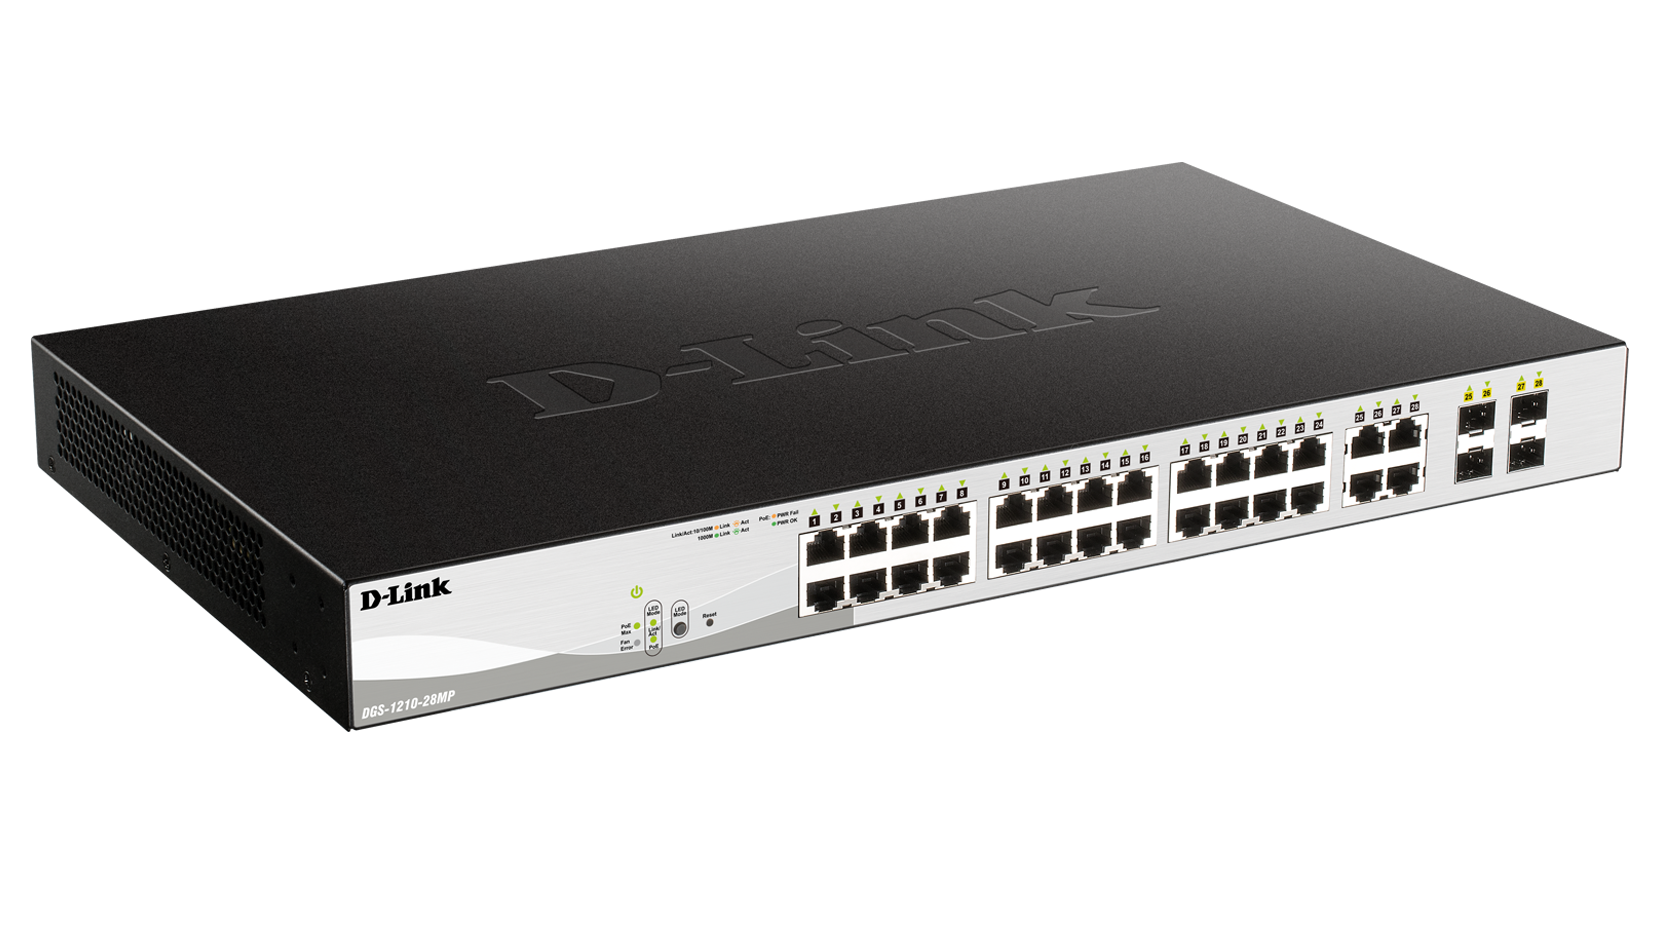 D-Link DGS-1210-28MP 24-Port Gigabit Smart Managed PoE Switch with